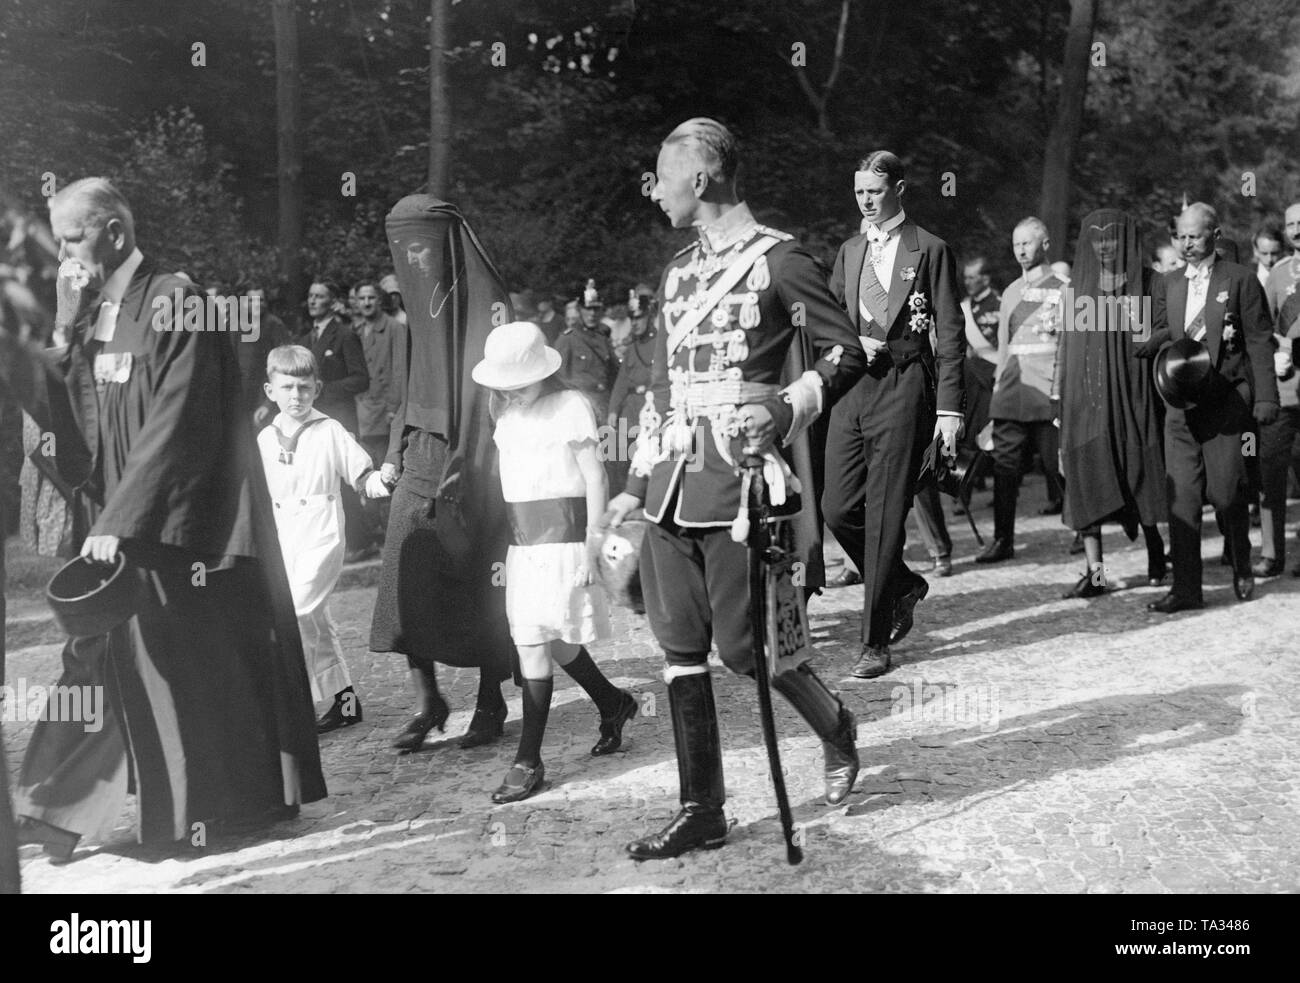 On July 6, Prince Sigismund was killed in a riding accident in Lucerne. A few days later he was buried near Berlin in Nikolskoe. In the funeral procession the clergy is followed by the members of the House of Prussia. 1st row from left to right: Prince Friedrich Karl, the widow Princess Marie Louise (b. Princess zu Schaumburg-Lippe), Princess Louise, Crown Prince Wilhelm. 2nd row: Prince Friedrich Leopold of Prussia. 3rd row: Crown Princess Cecilie. 4th row from left to right: Prince Oskar and Prince August Wilhelm. Stock Photo